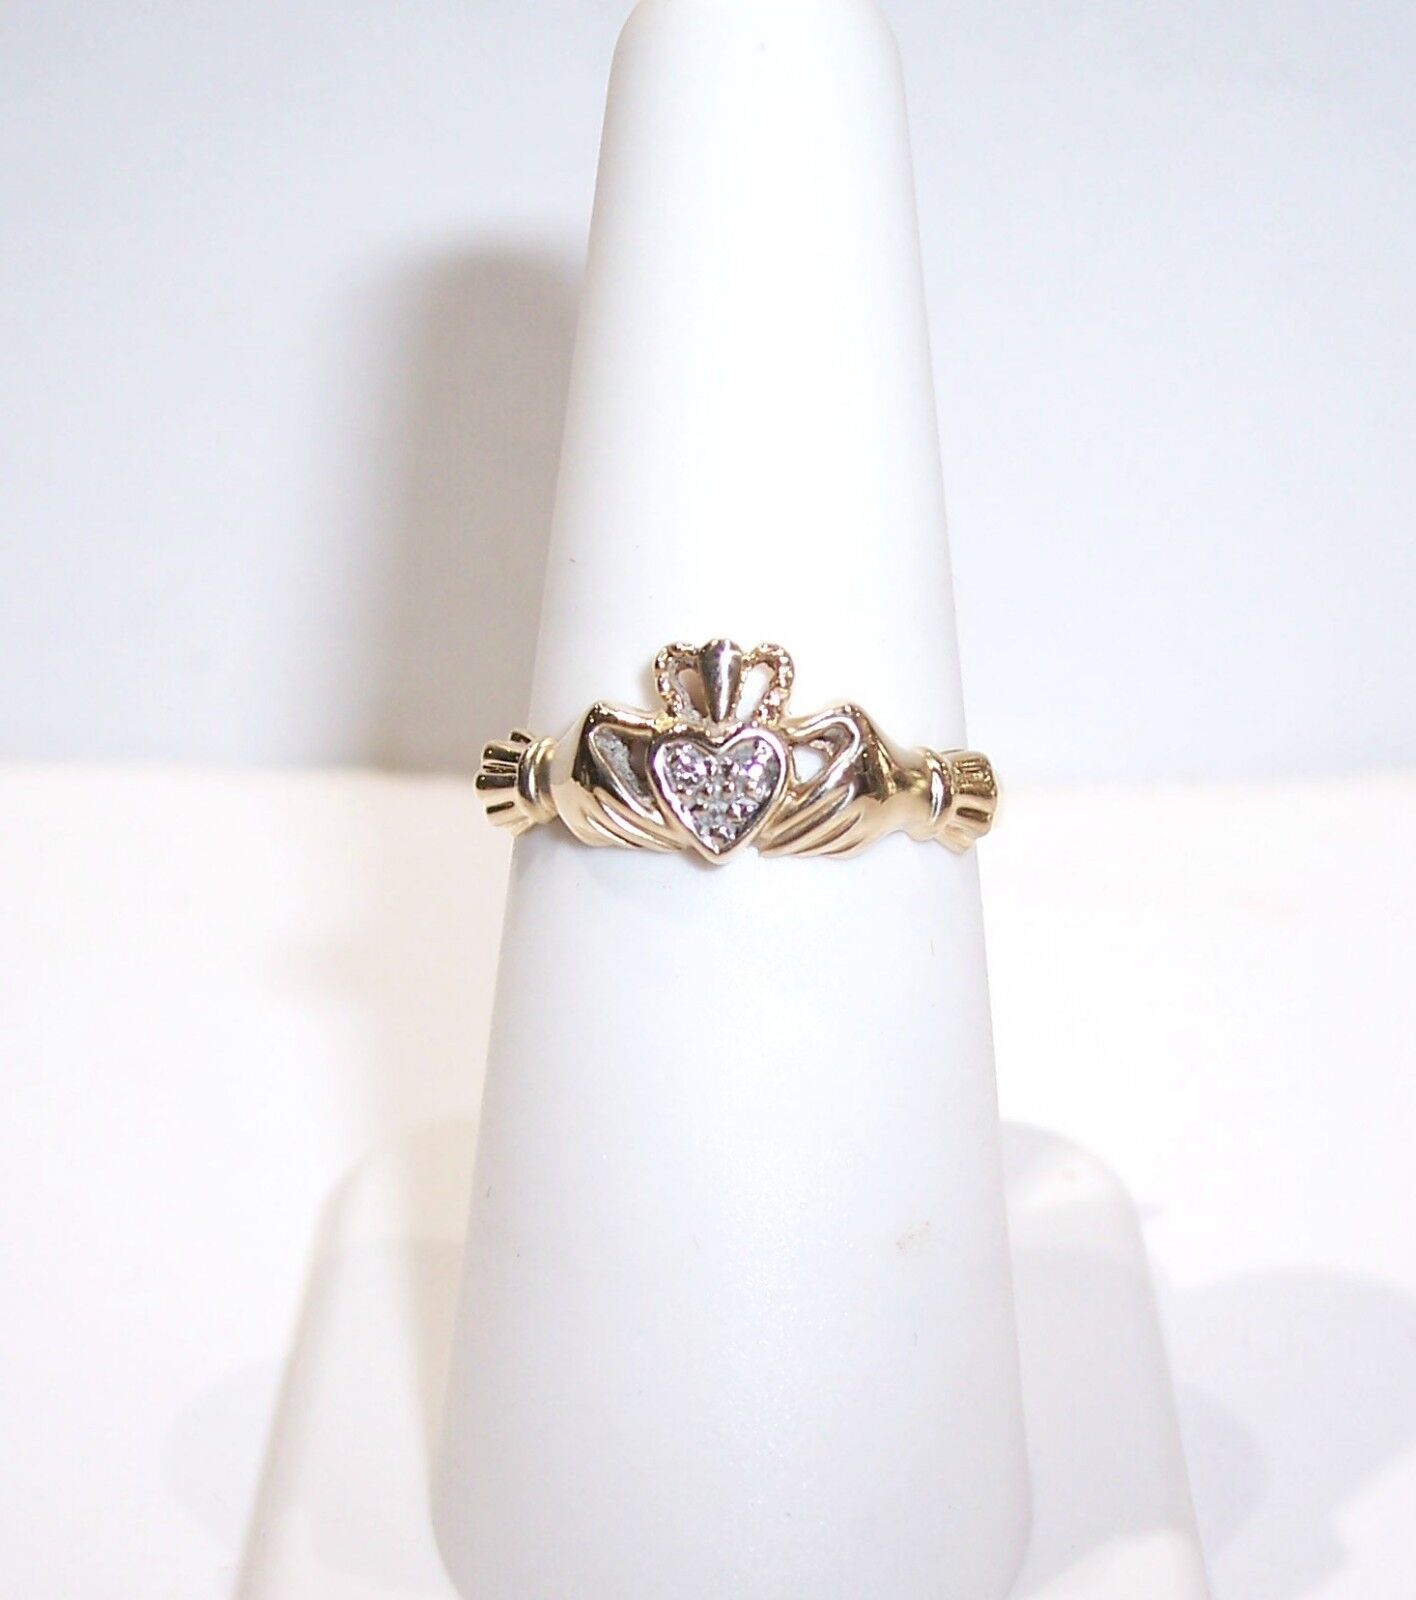 PETITE CLADDAGH RING- ESTATE SALE- CLEARANCE CLOSE OUT SALE- BUY IT NOW